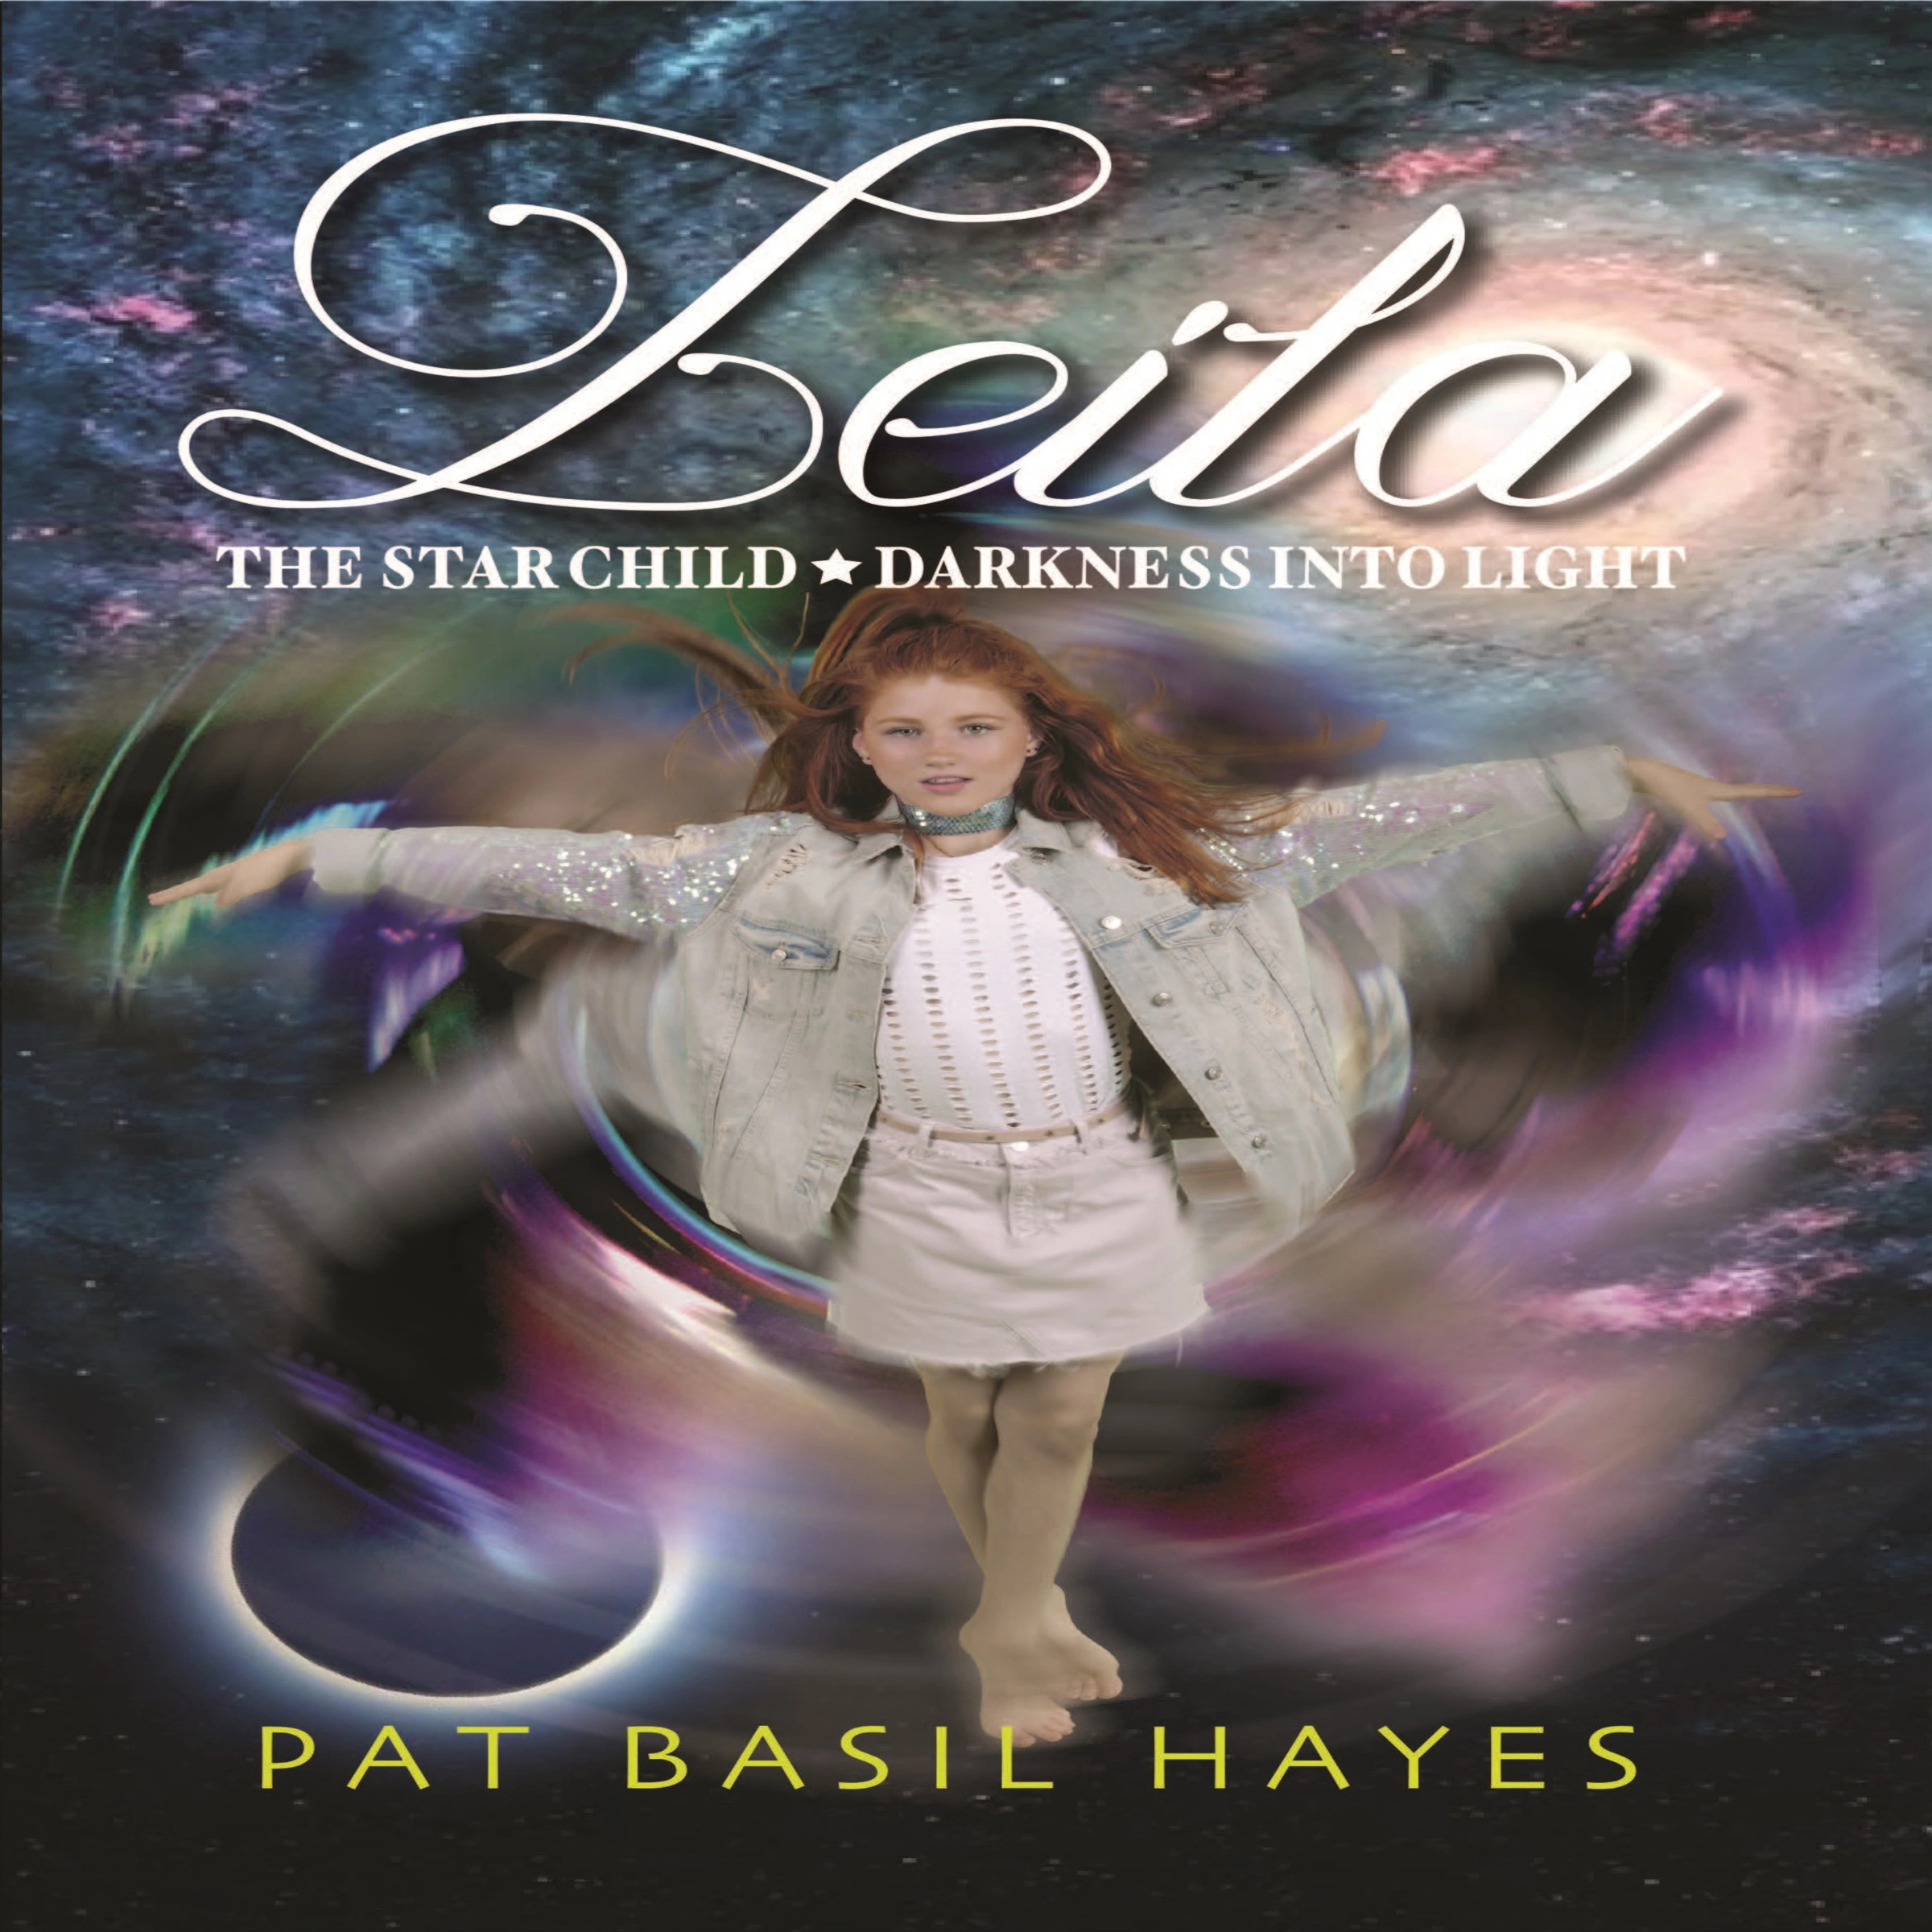 Leila:  The Star Child by Pat Basil Hayes Audiobook